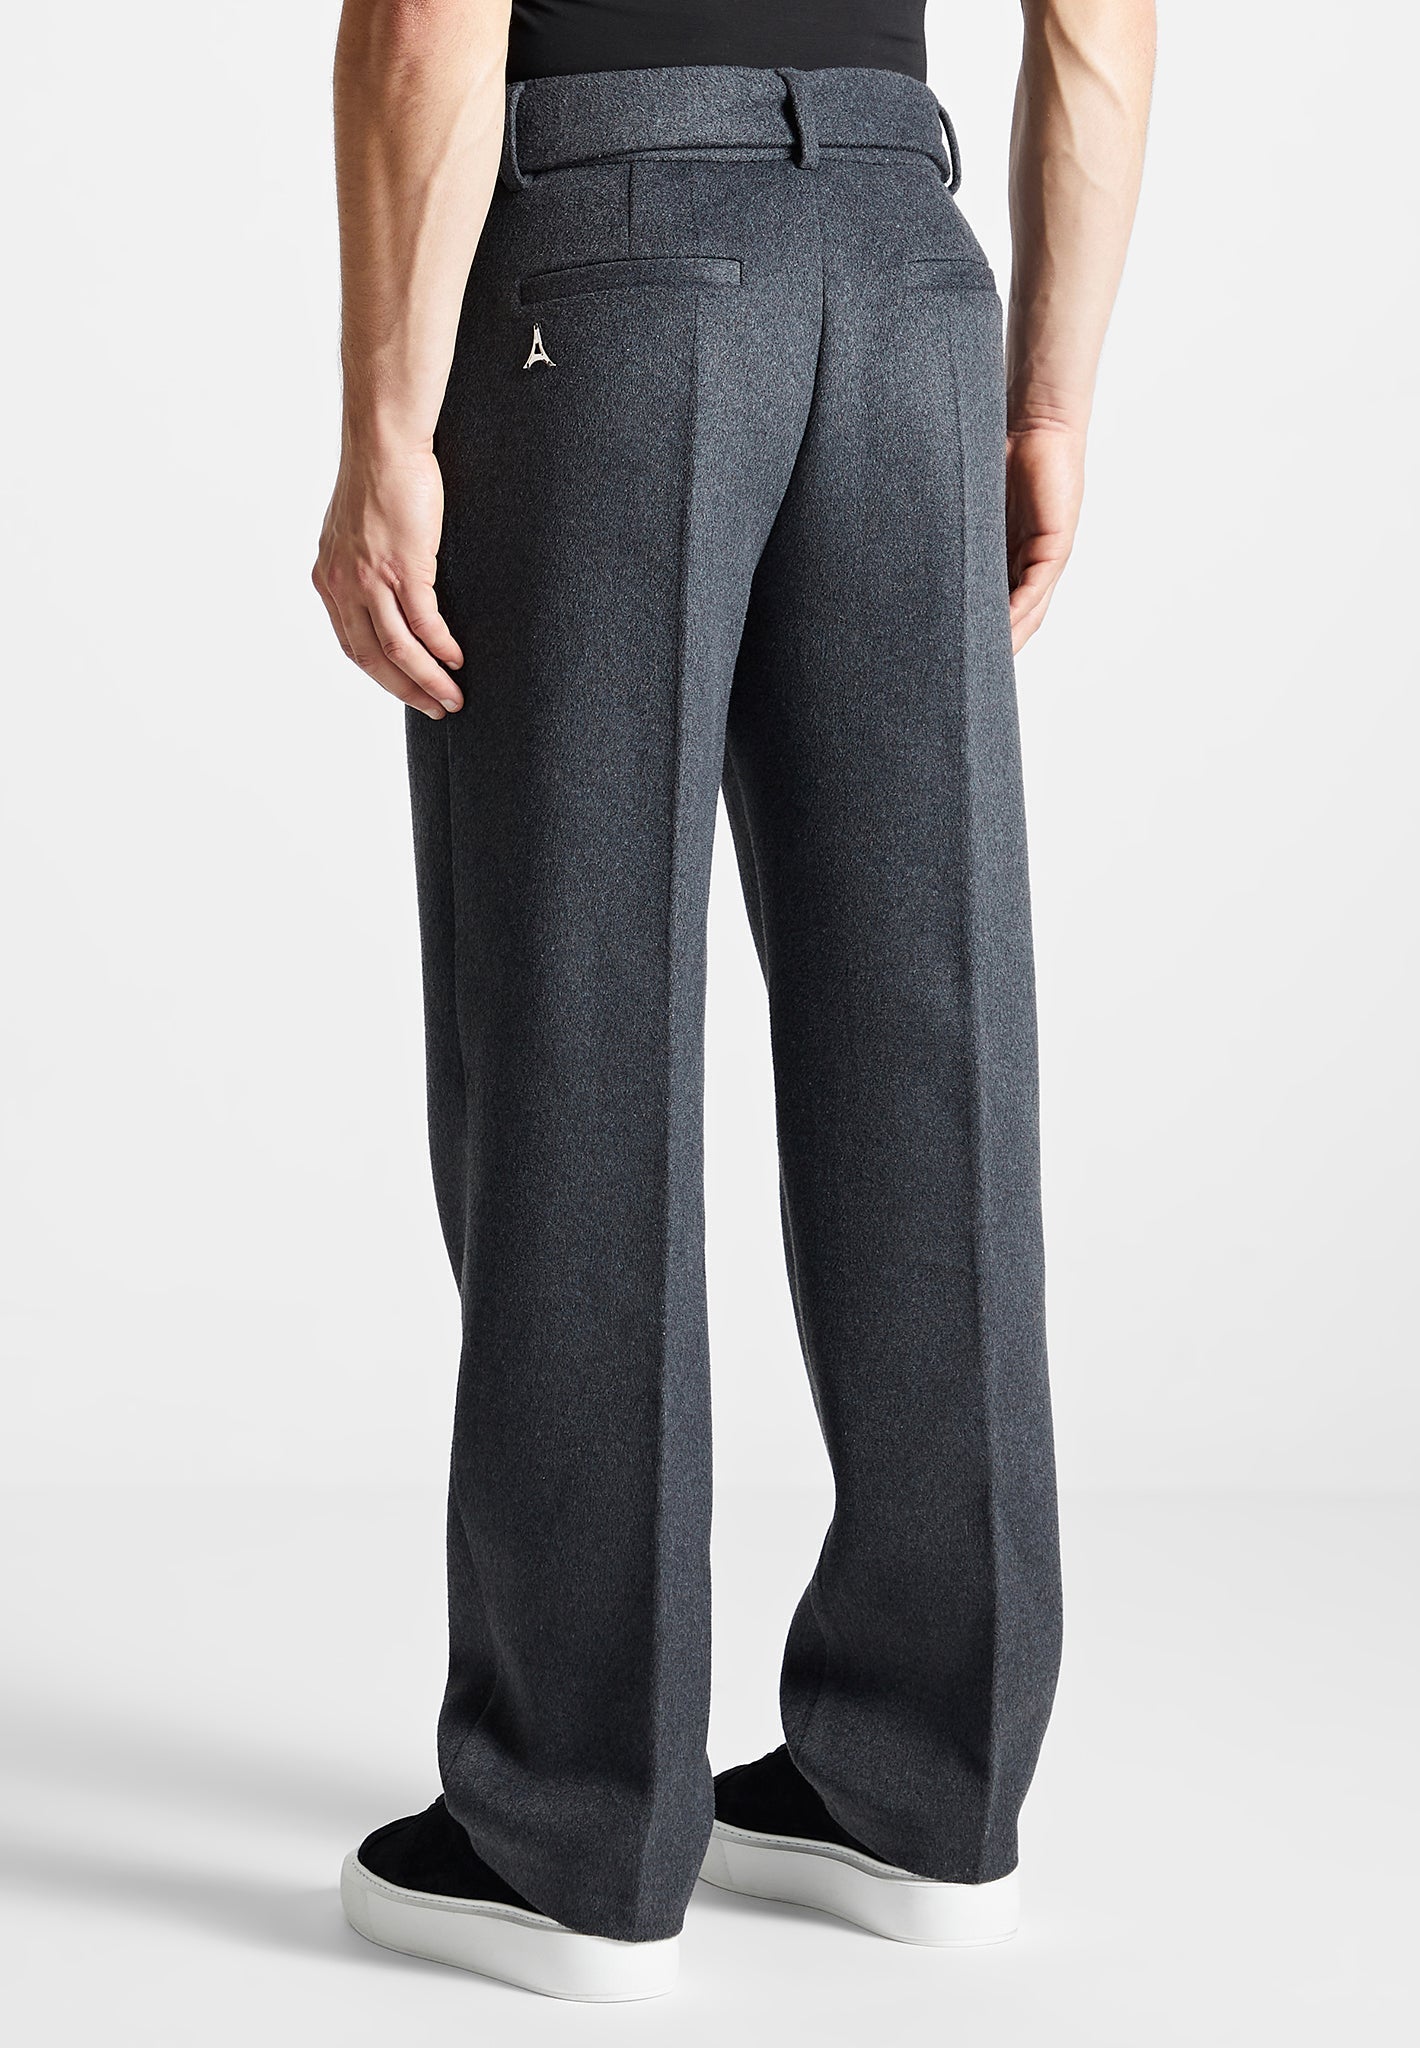 Wool Blend Marl Belted Trousers - Charcoal Grey